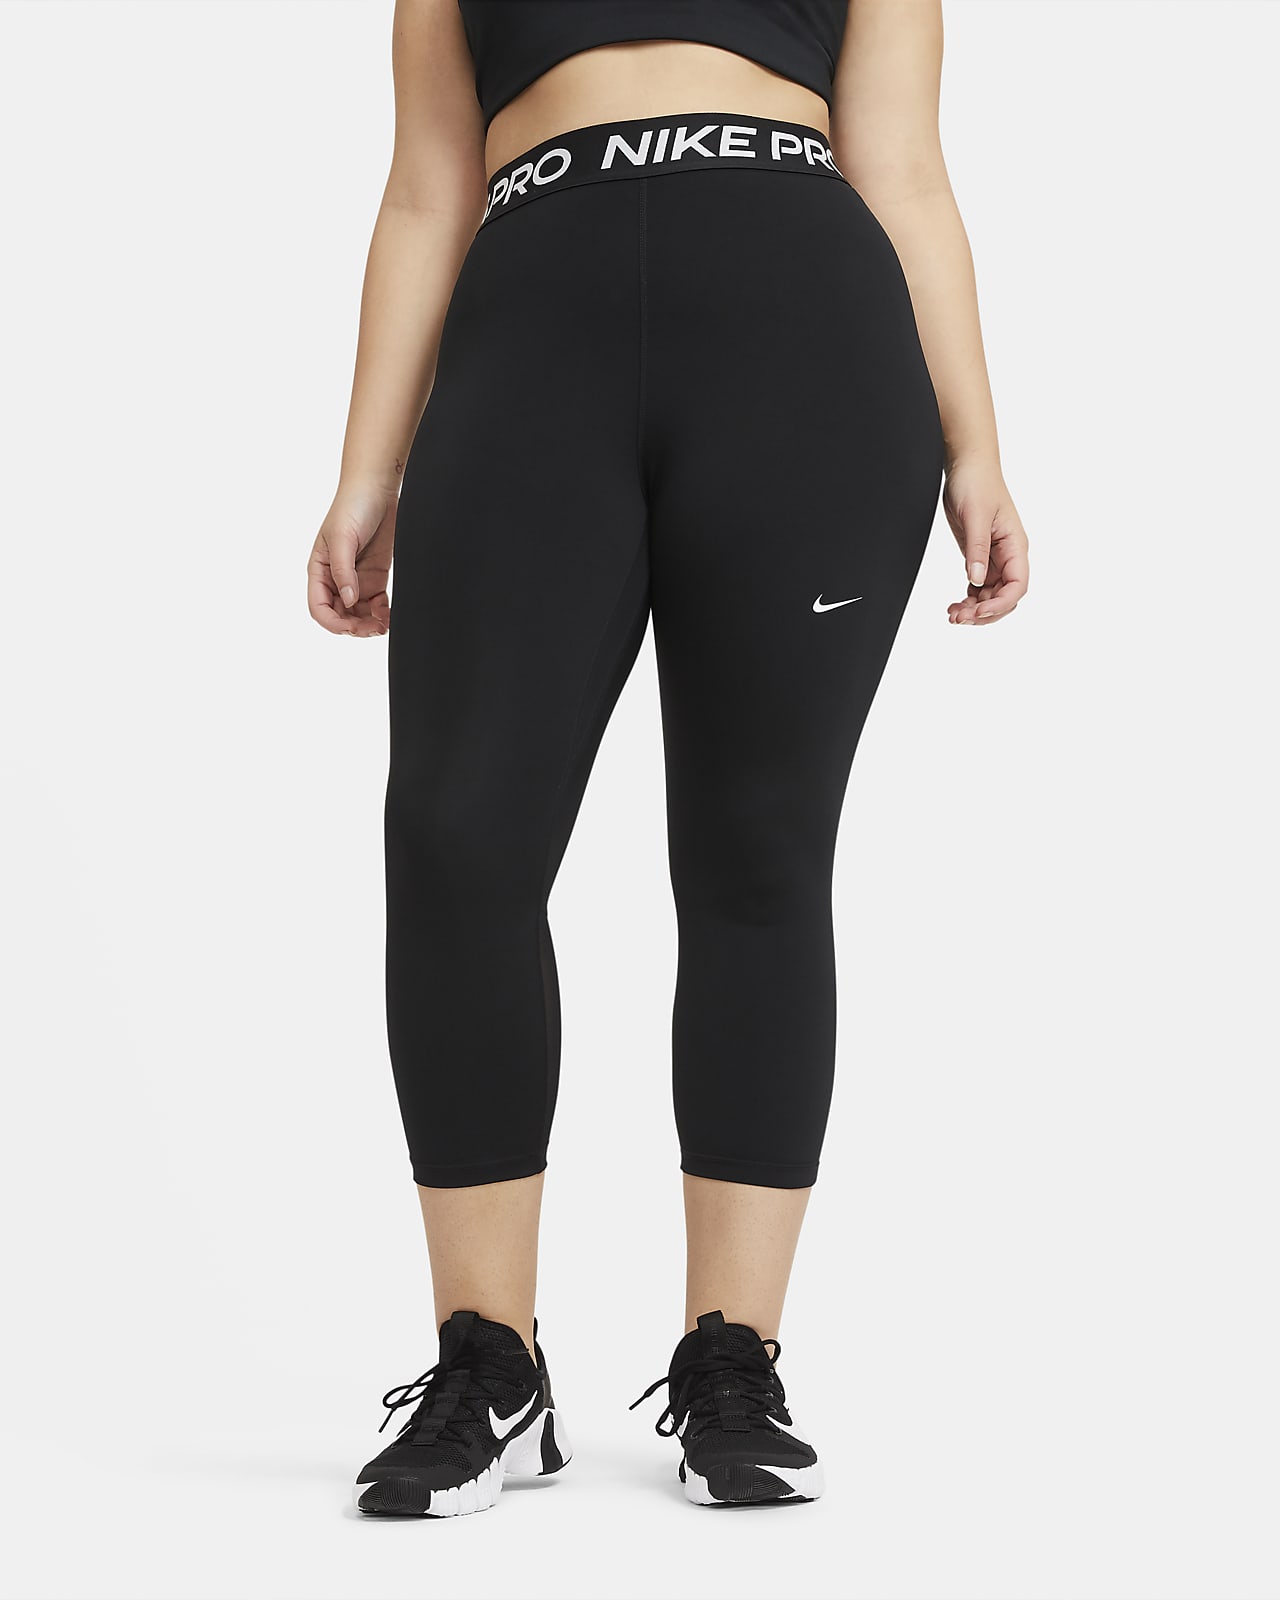 Nike pro leggings Size small Brand new with - Depop